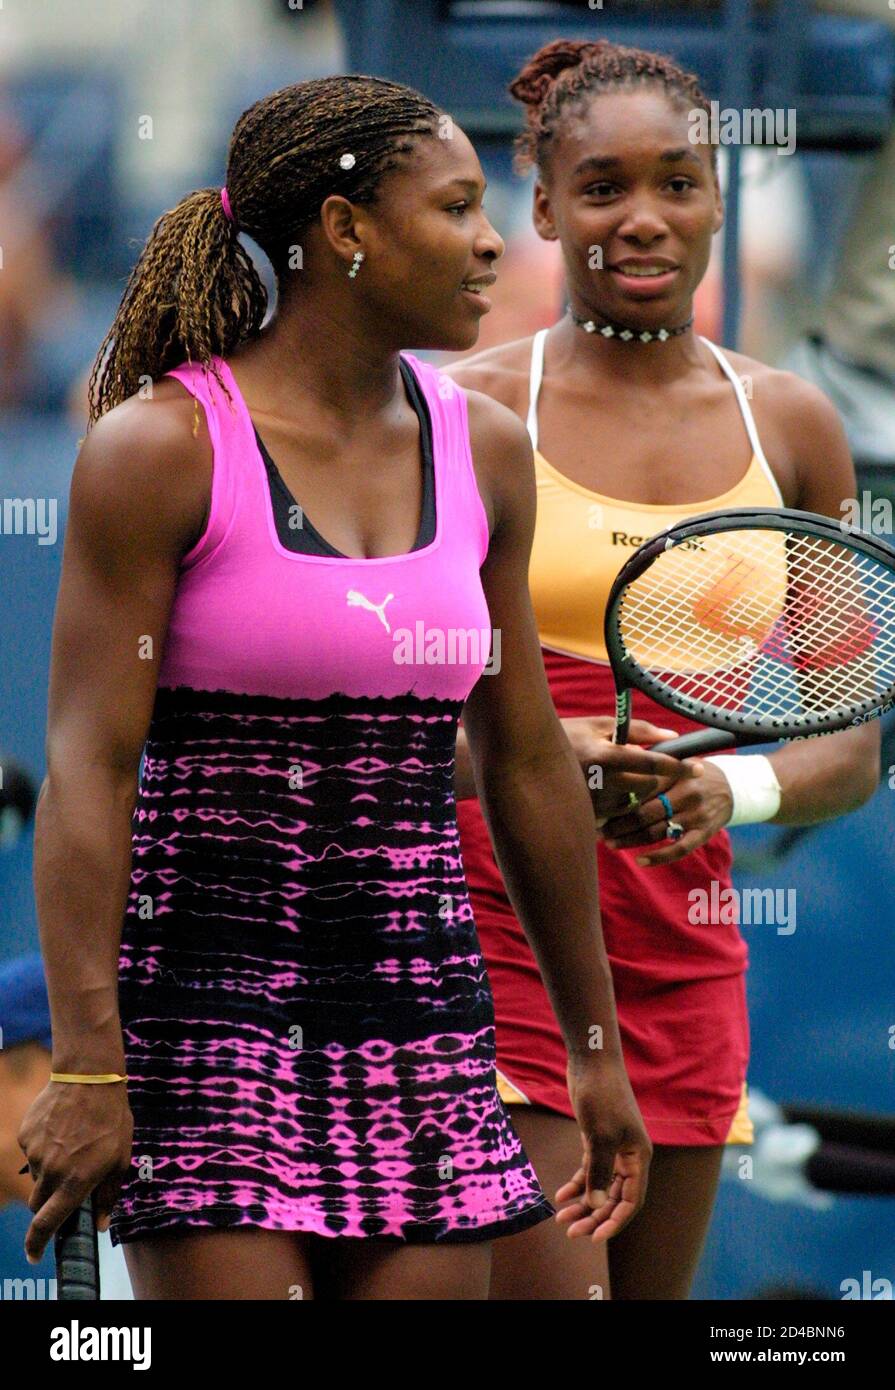 Serena Williams (L) and sister Venus of the United States take the court in  their doubles match against Kristie Boogert and Miriam Oremans of the  Netherlands at the U.S. Open in New